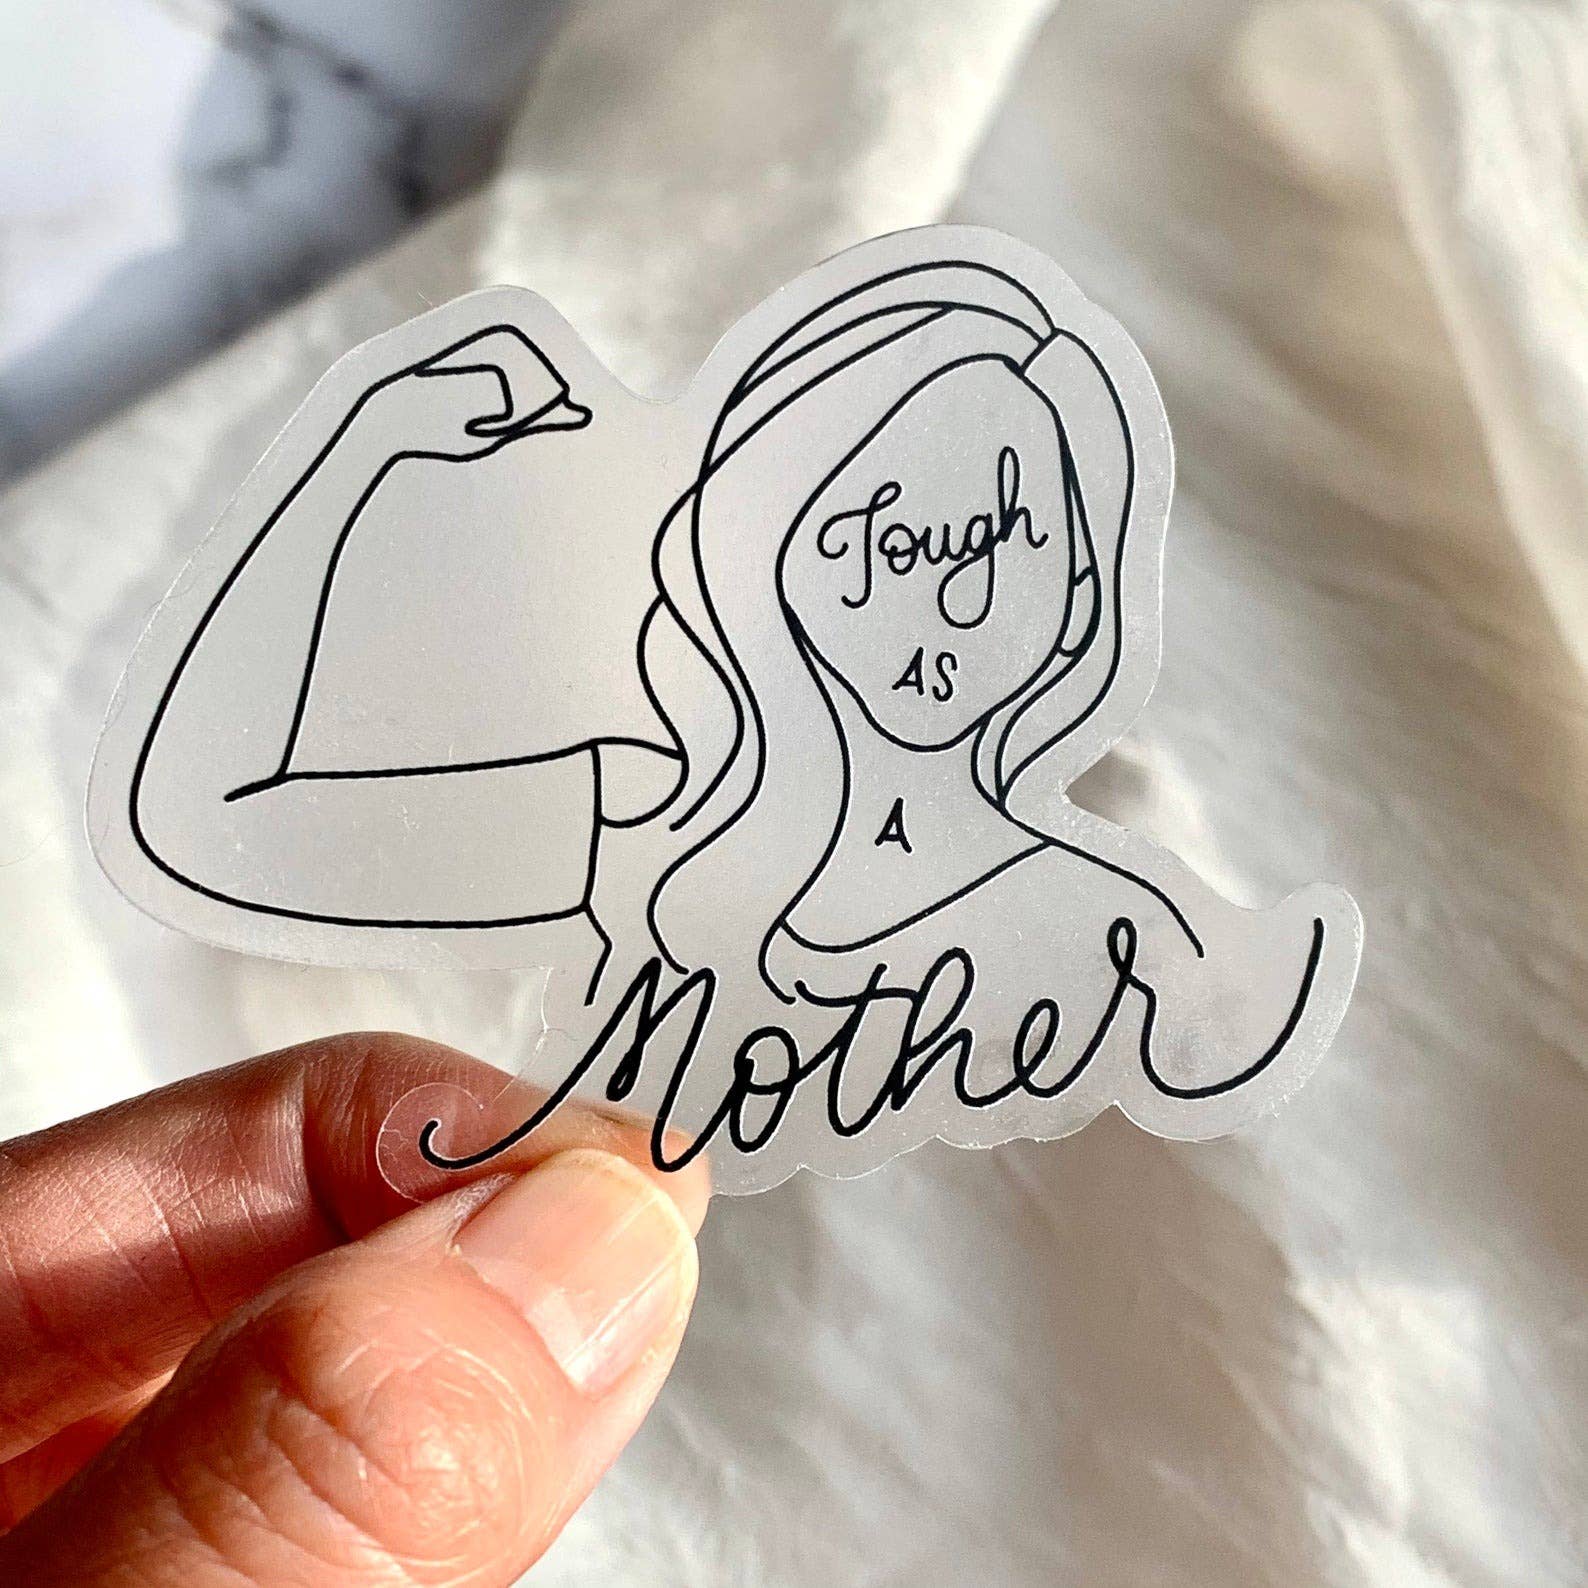 Tough And A Mother sticker Pen and Paces